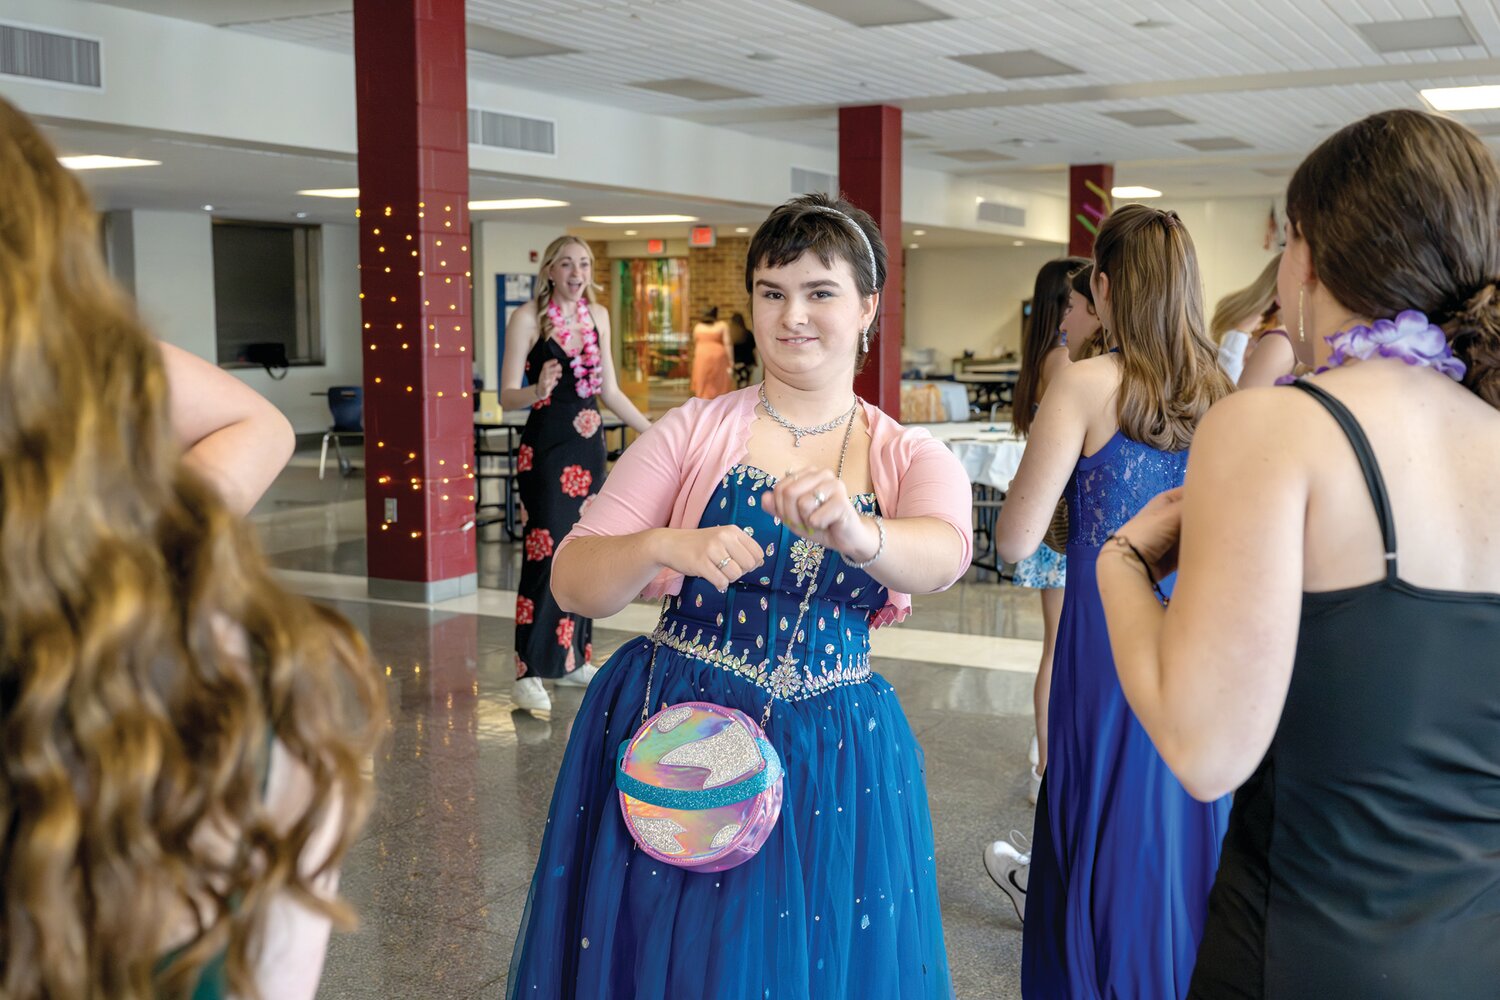 Evi McCormack, Calli Pasternack and Rachel Southard gather with friends to dance during Central Bucks East High School’s first Unified Prom March 15.